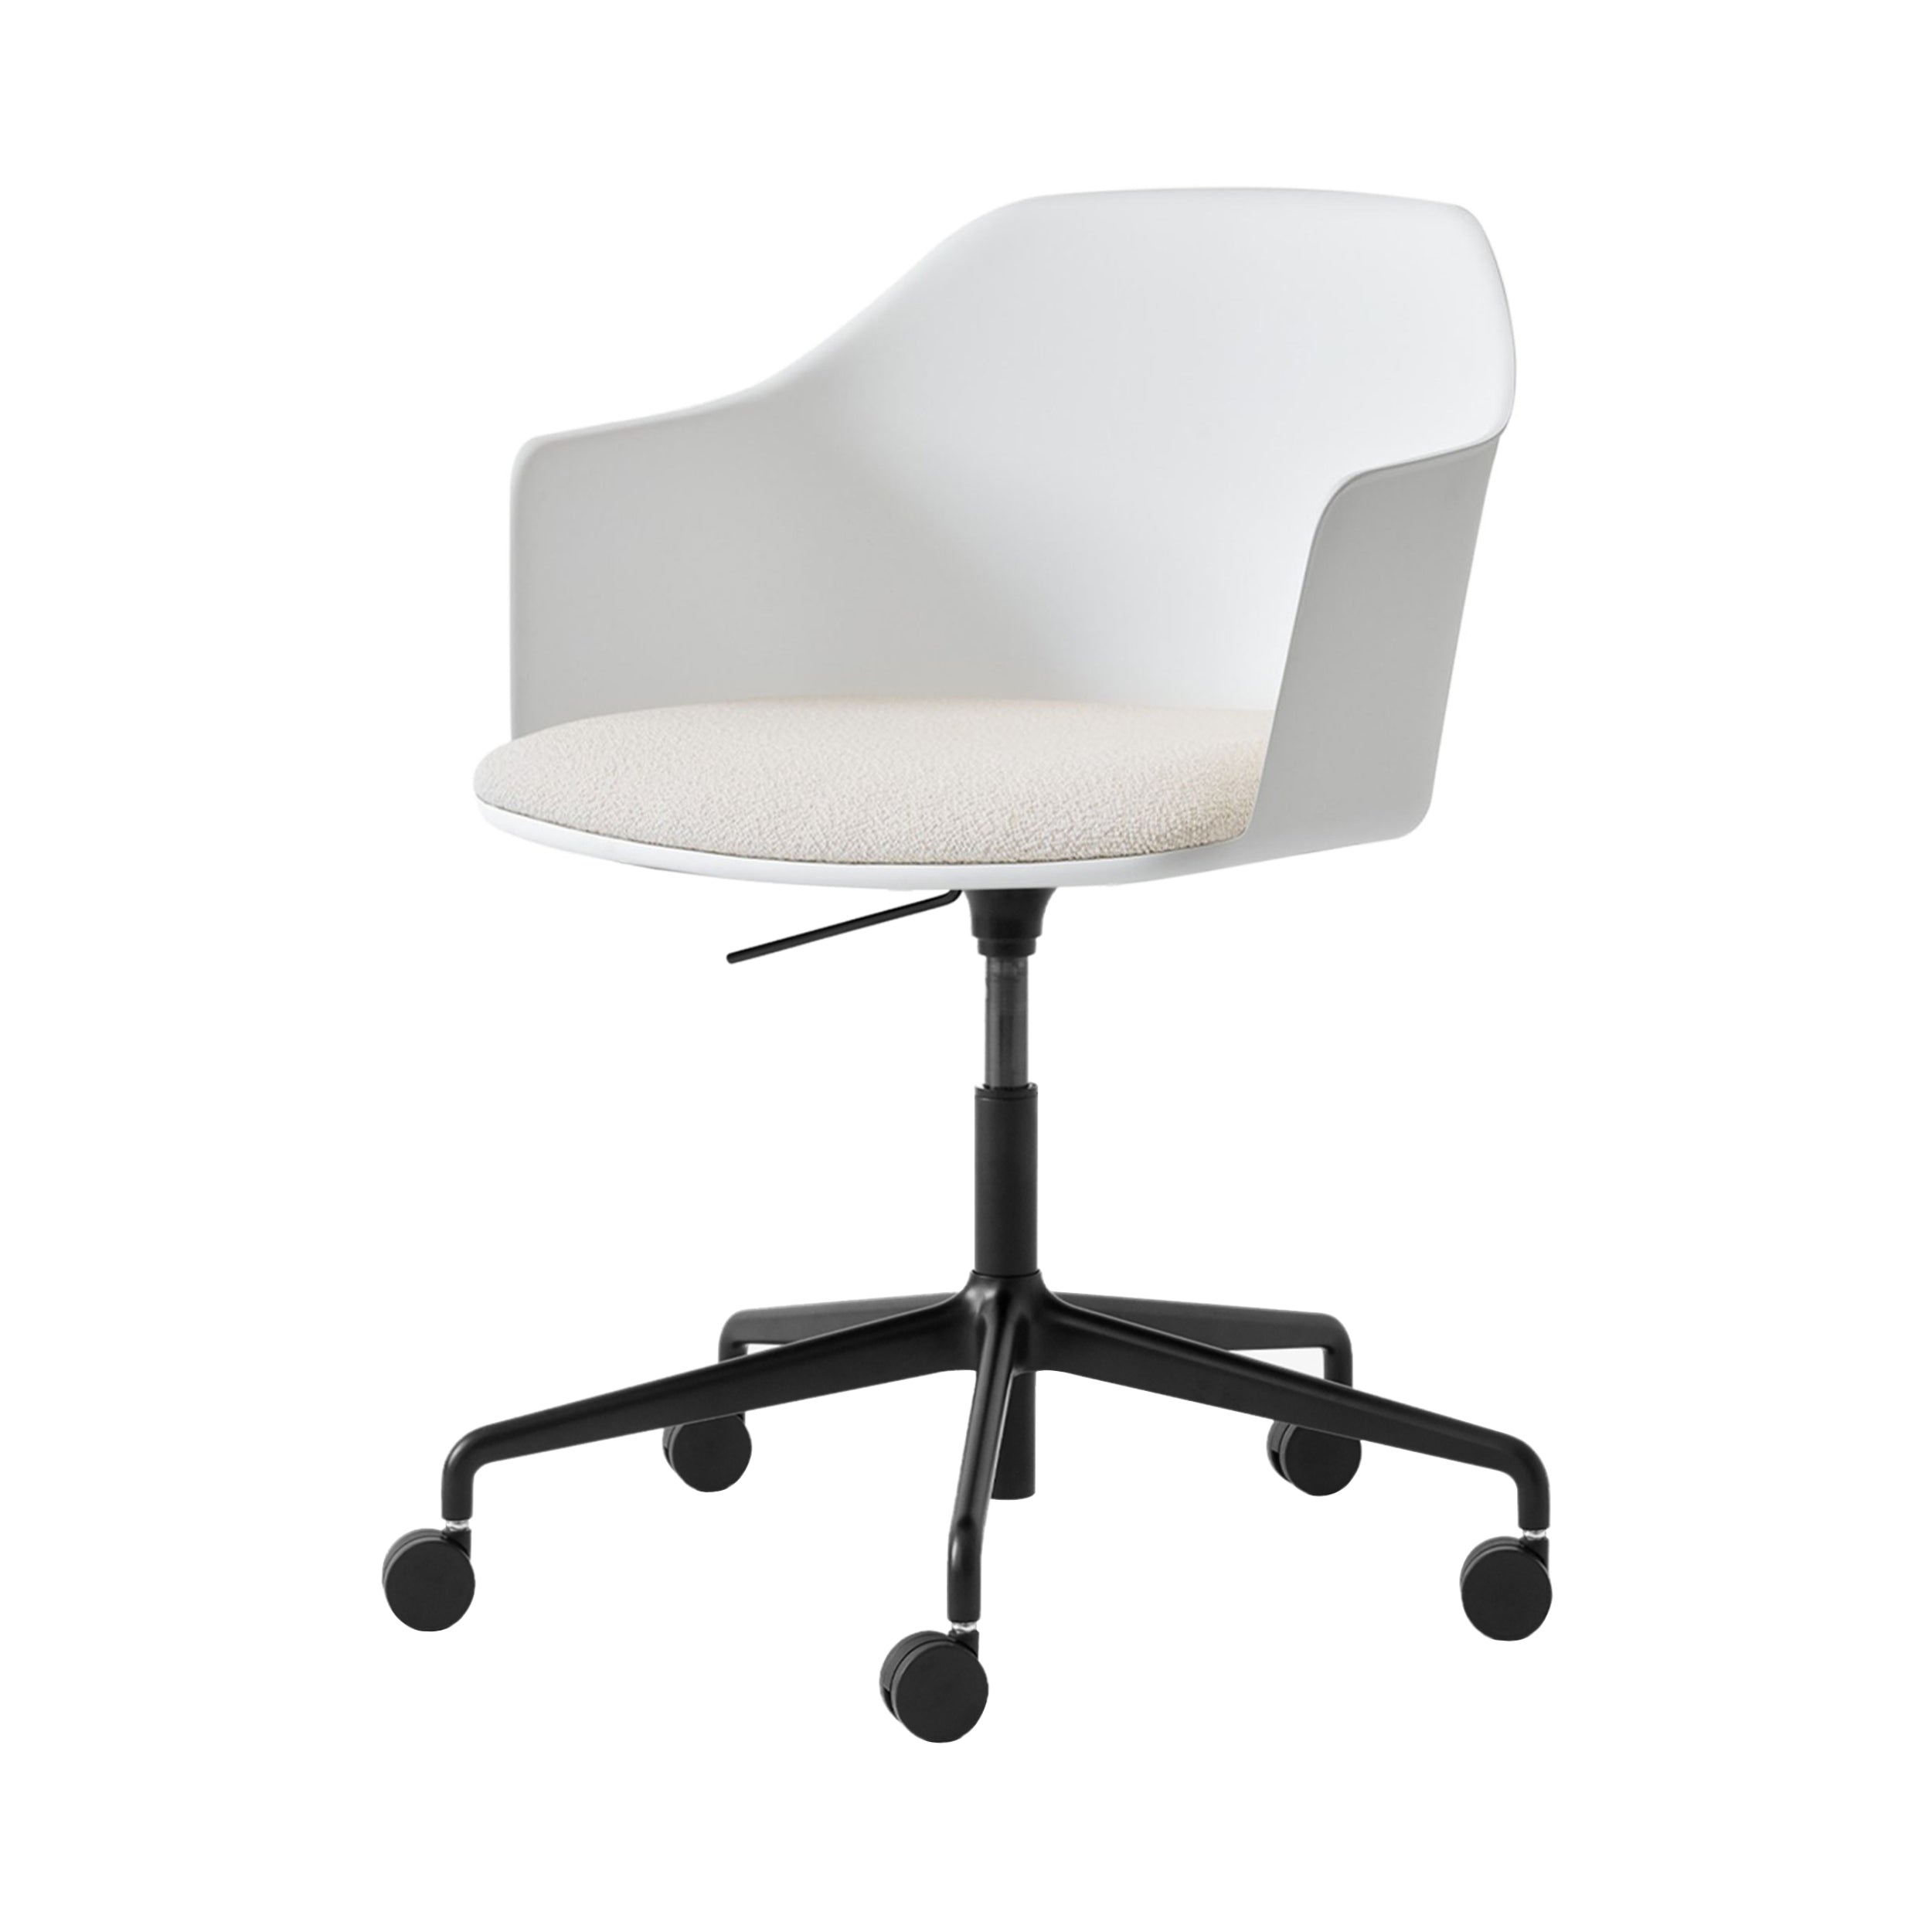 Rely Chair HW54: White